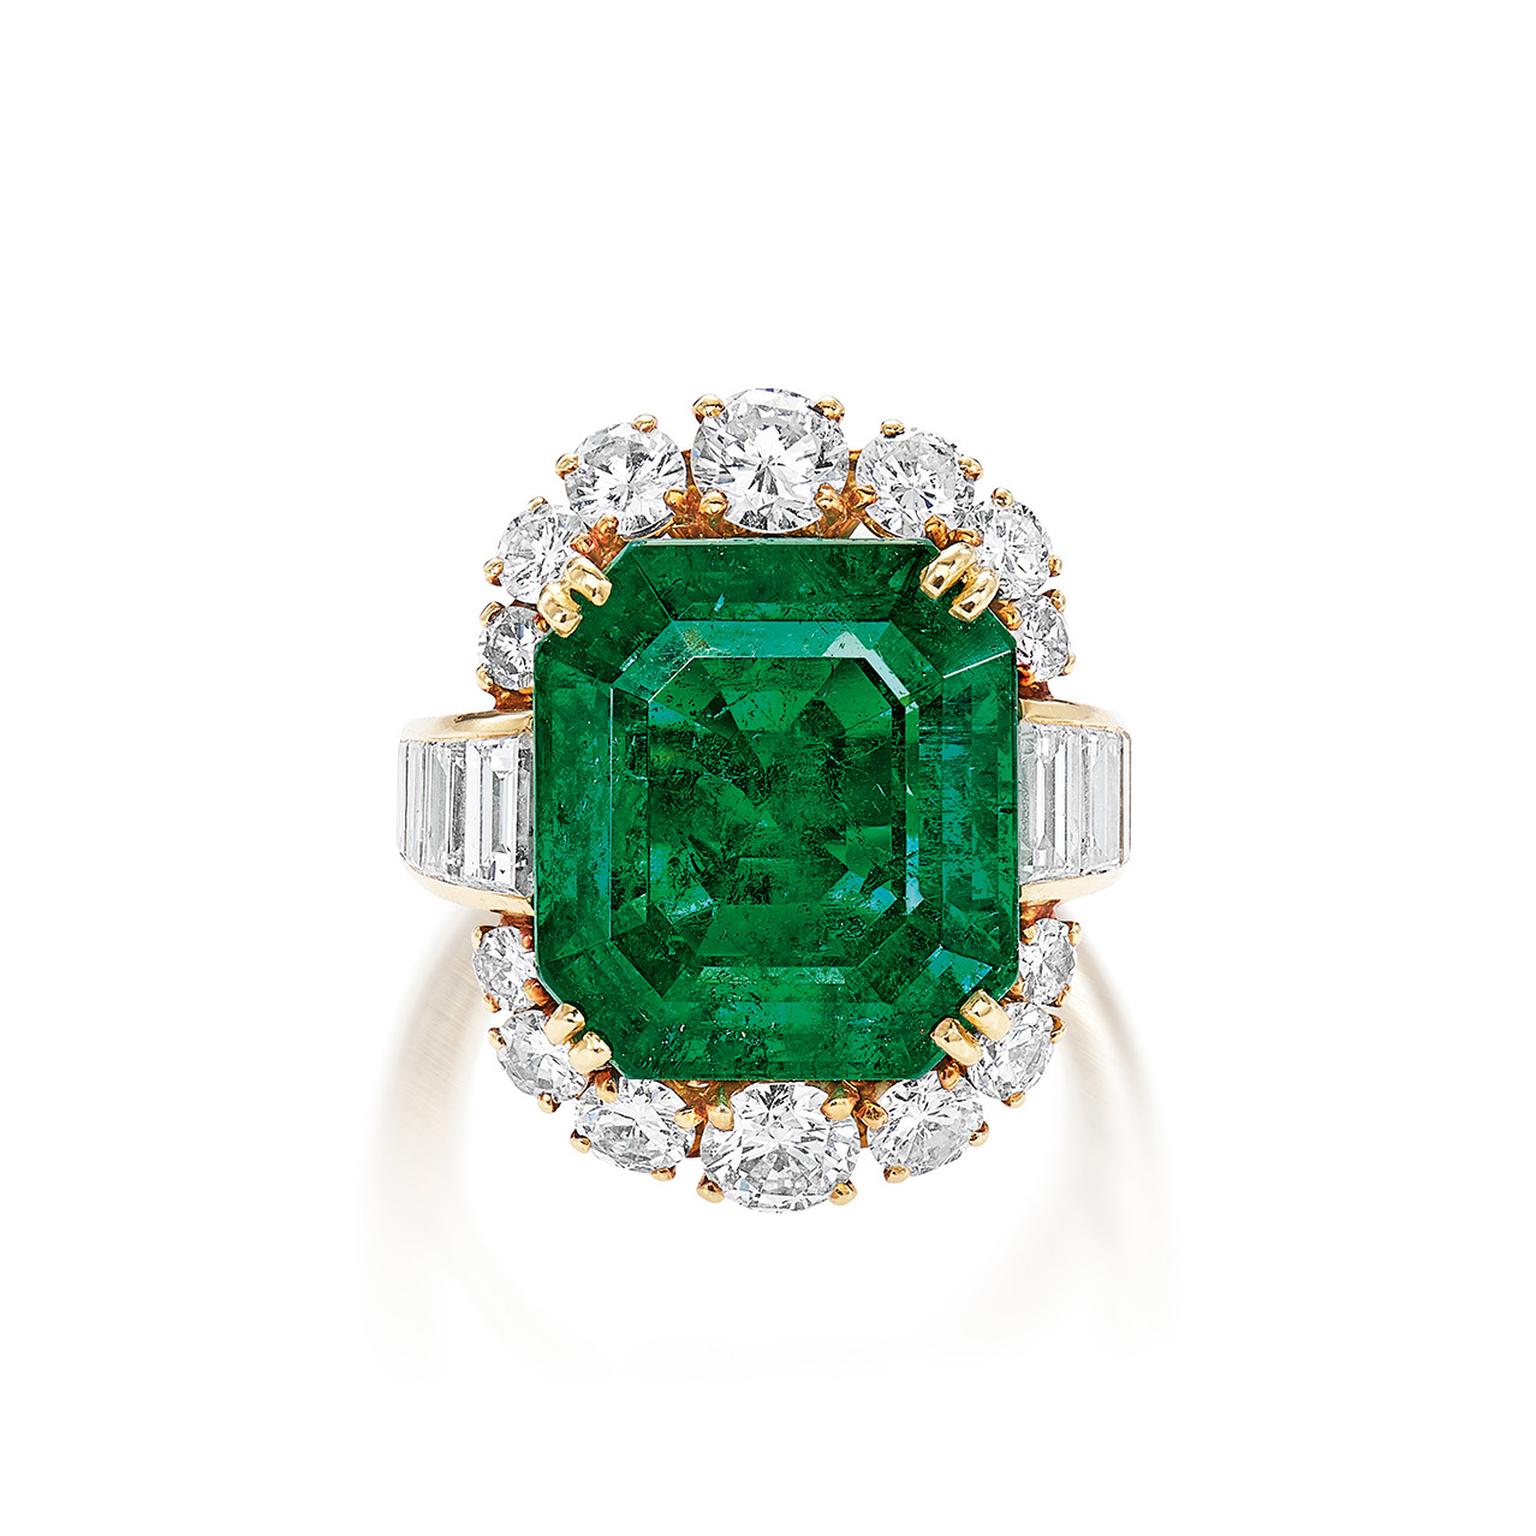 Lot 654 - Emerald ring by VCA- Phillips Auction 5 June 2021